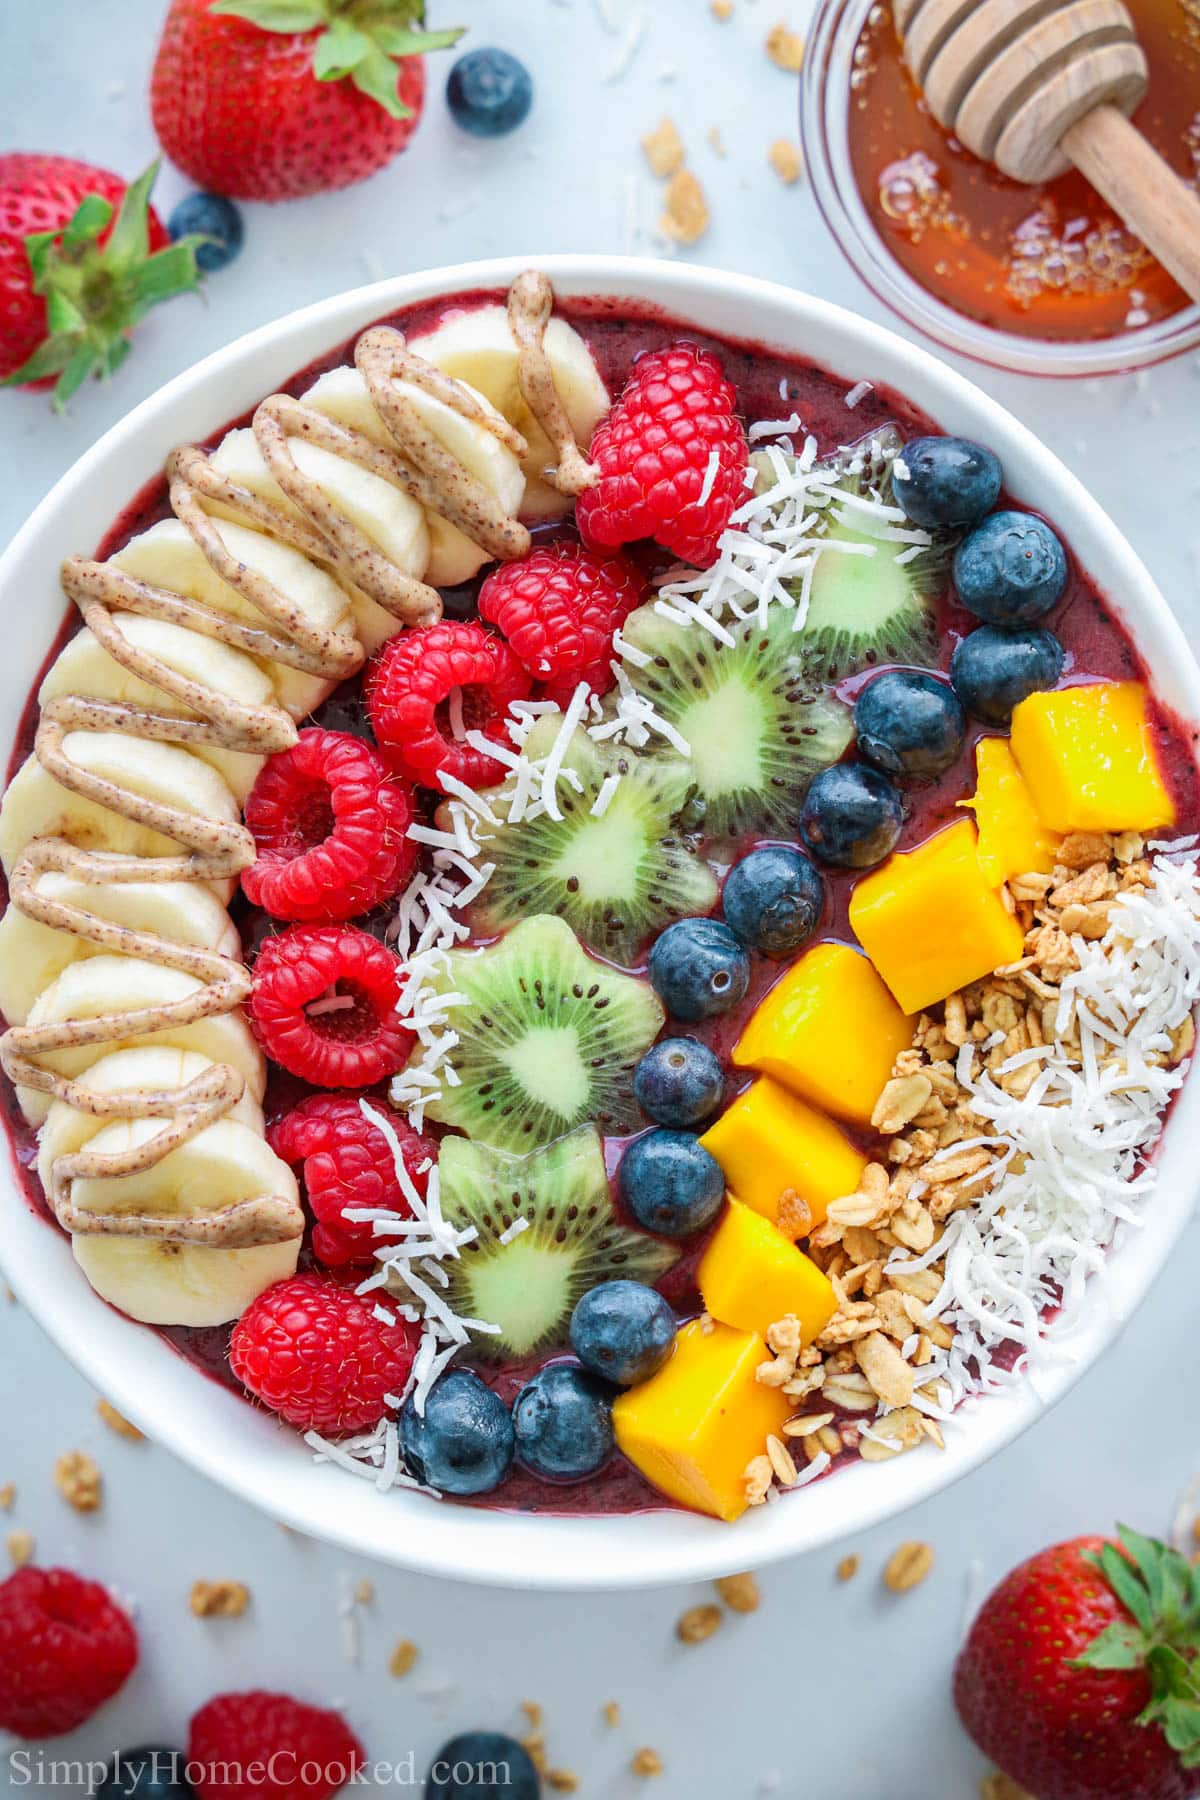 Acai Bowl topped with fresh fruit, coconut flakes, granola, honey, and nut butter, with strawberries and honey nearby.